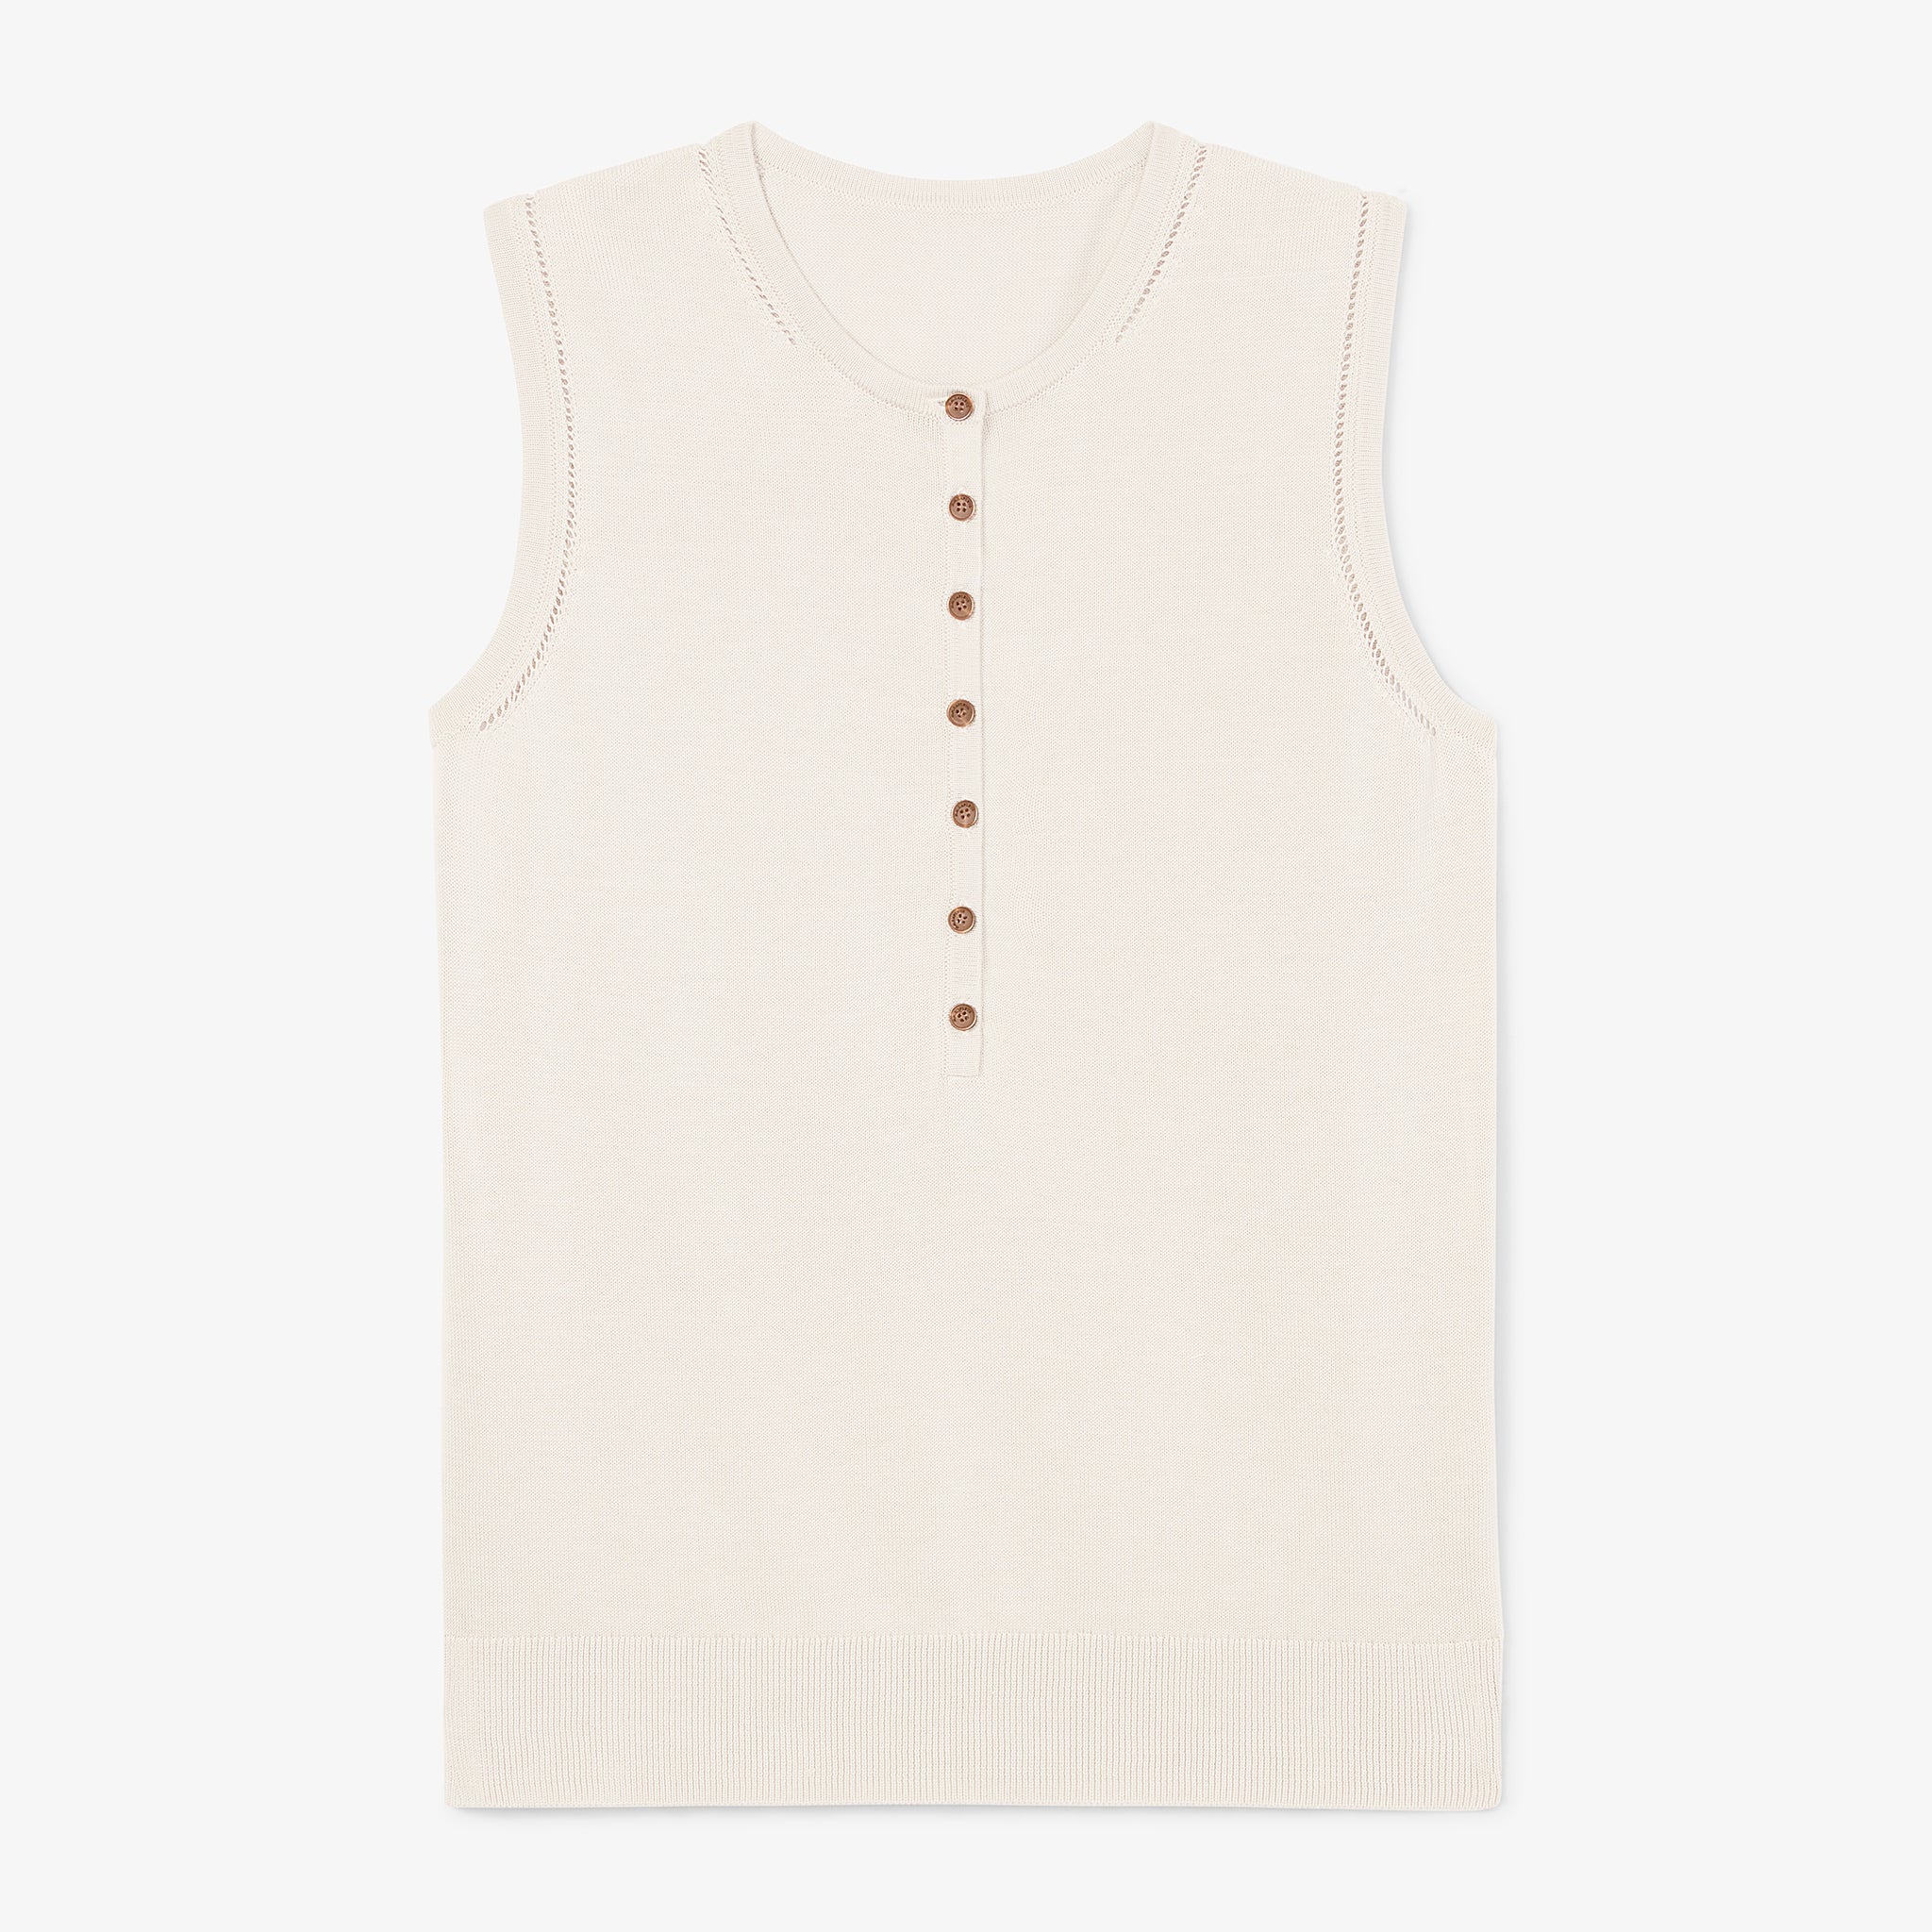 packshot image of the crimmins top in ivory